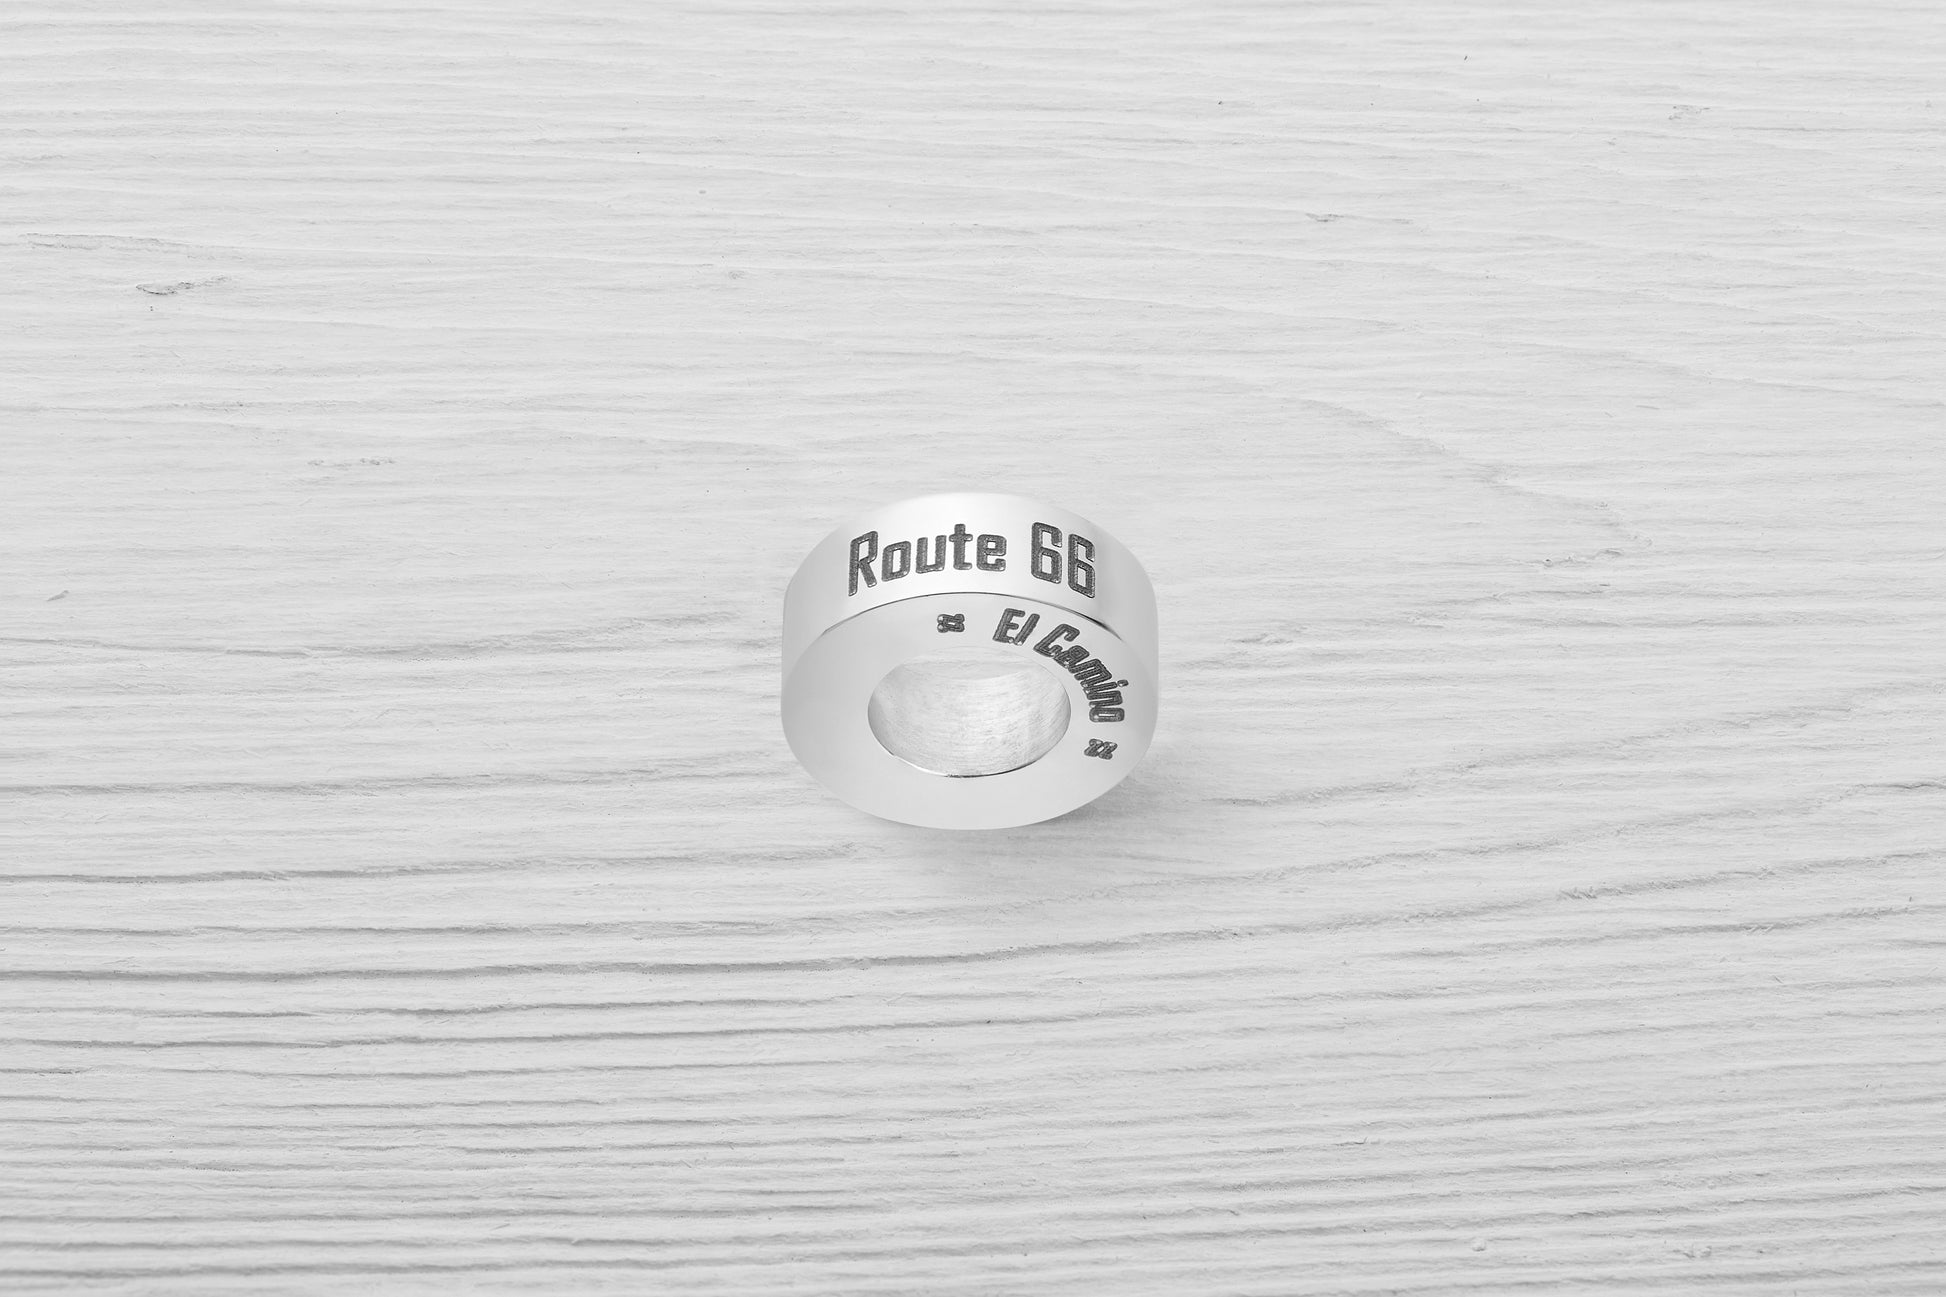 Route 66 El Camino Small Step Travel Charm Bead